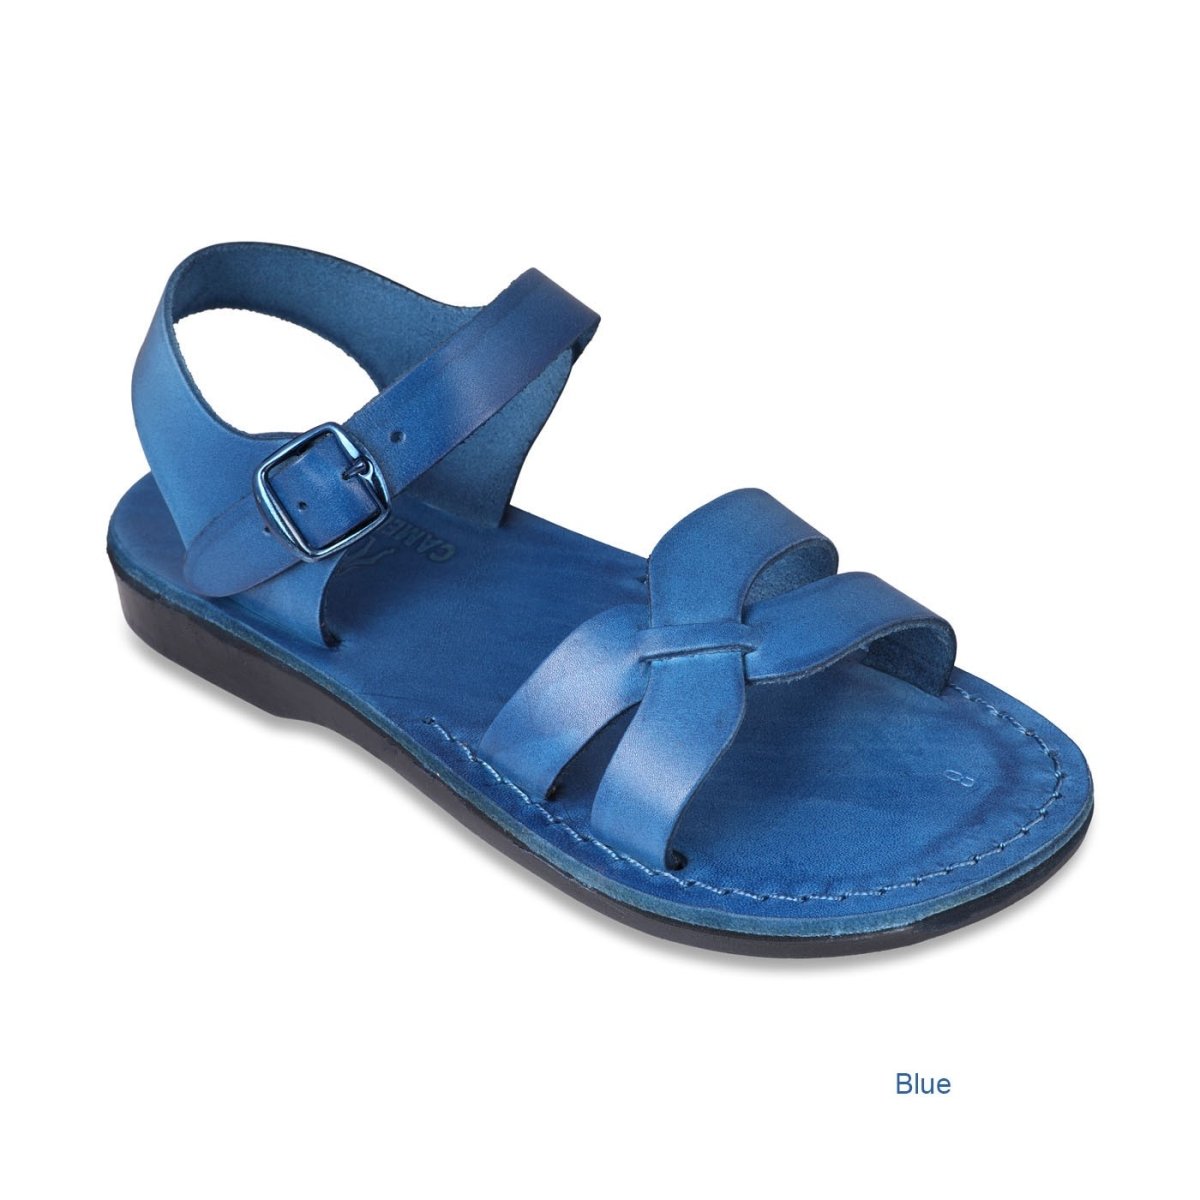 Andrew Handmade Leather Jesus Sandals (Variety of Colors) - 1